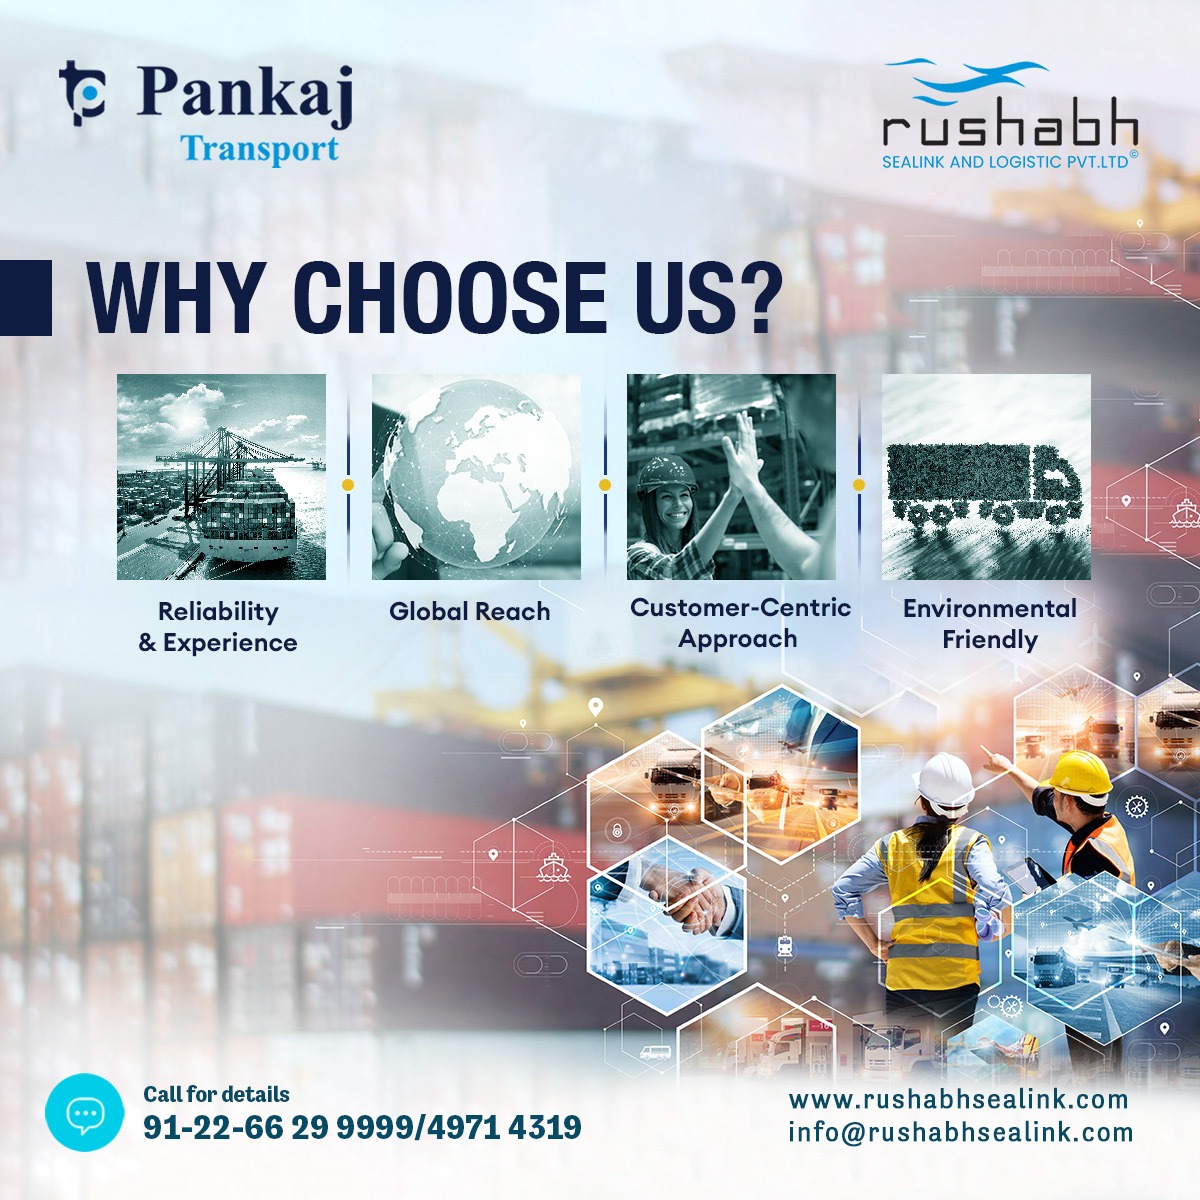 #RushabhSealink & #Logistics Pvt Ltd - Your Global #Cargo #DeliveryPartner🌍! With a commitment to customer satisfaction, reliability, and decades of industry experience🚚

📲 +91-22-6629 9999 / 4971 4319
🌐rushabhsealink.com

#freightforwarding #seafreight #oceanfreight